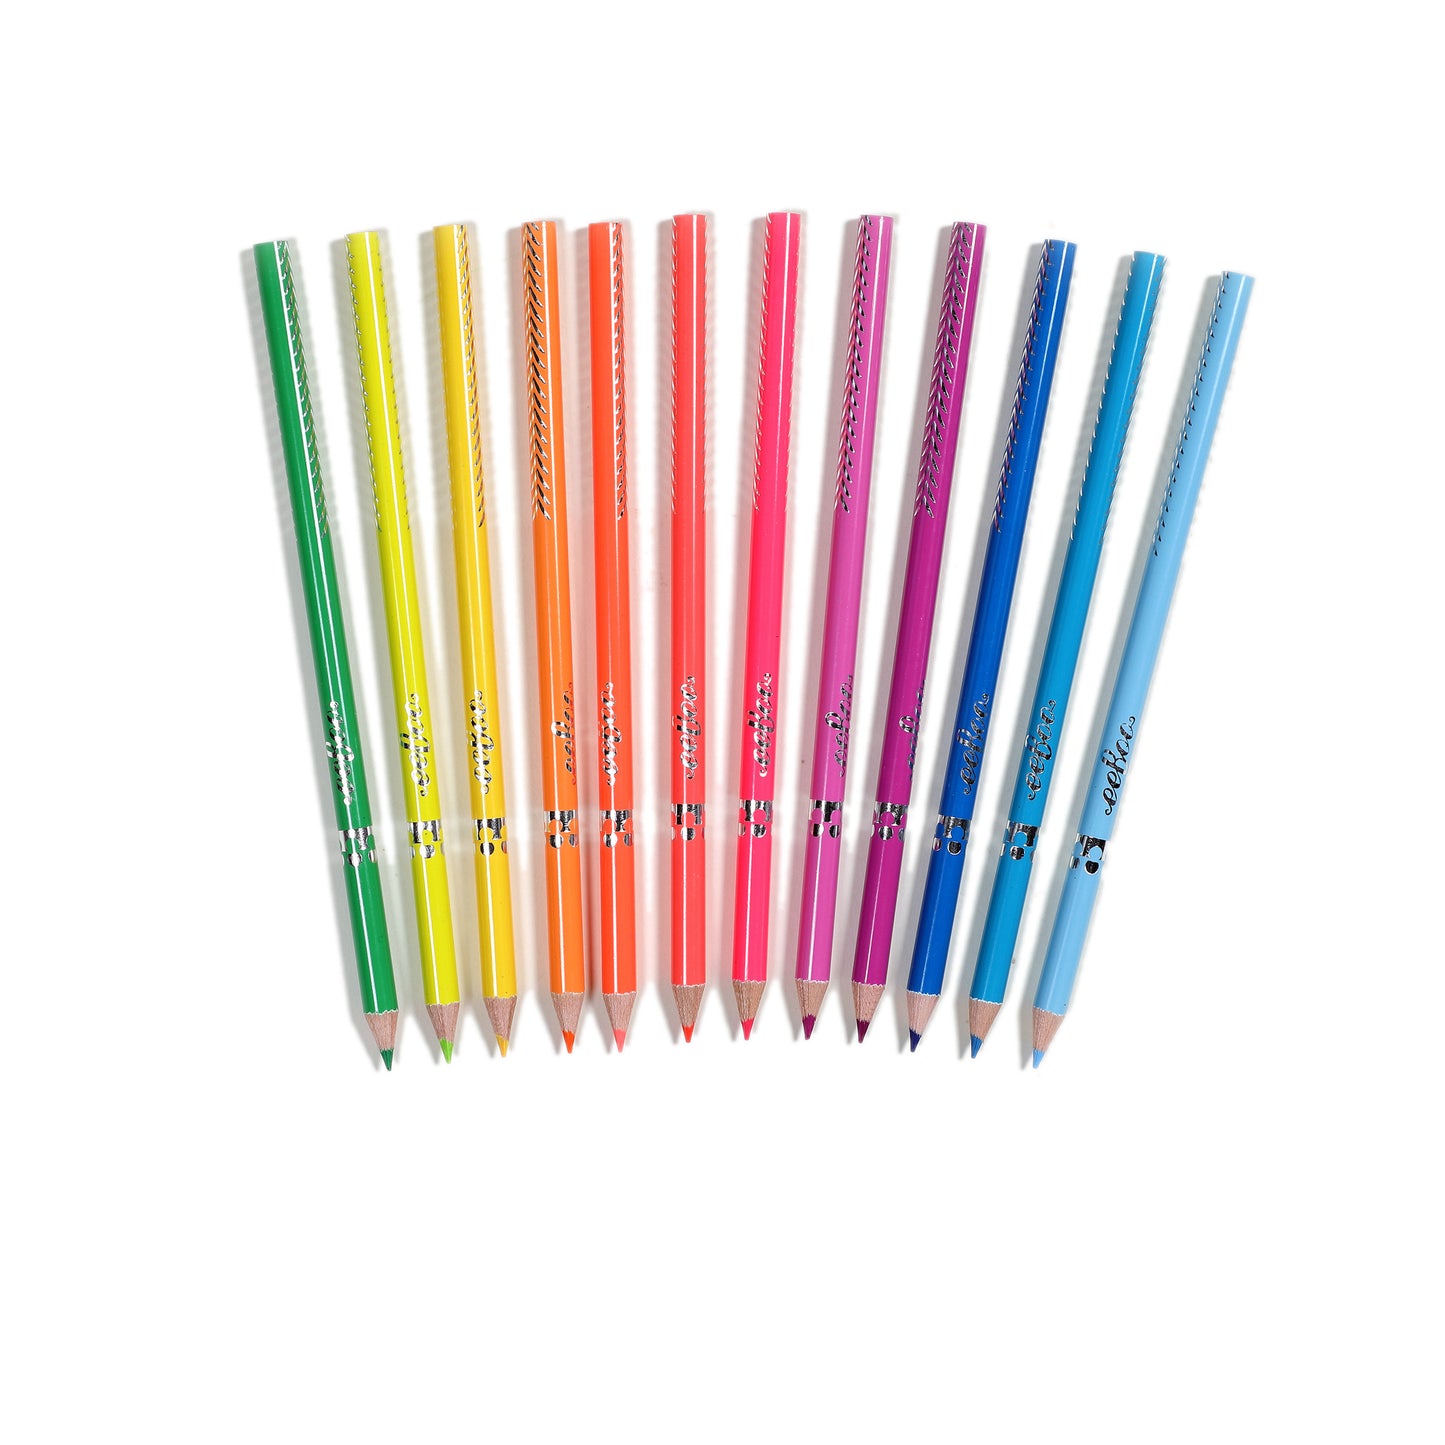 Positivity 12 Fluorescent Pencils and Sketchbook |  Gifts by eeBoo